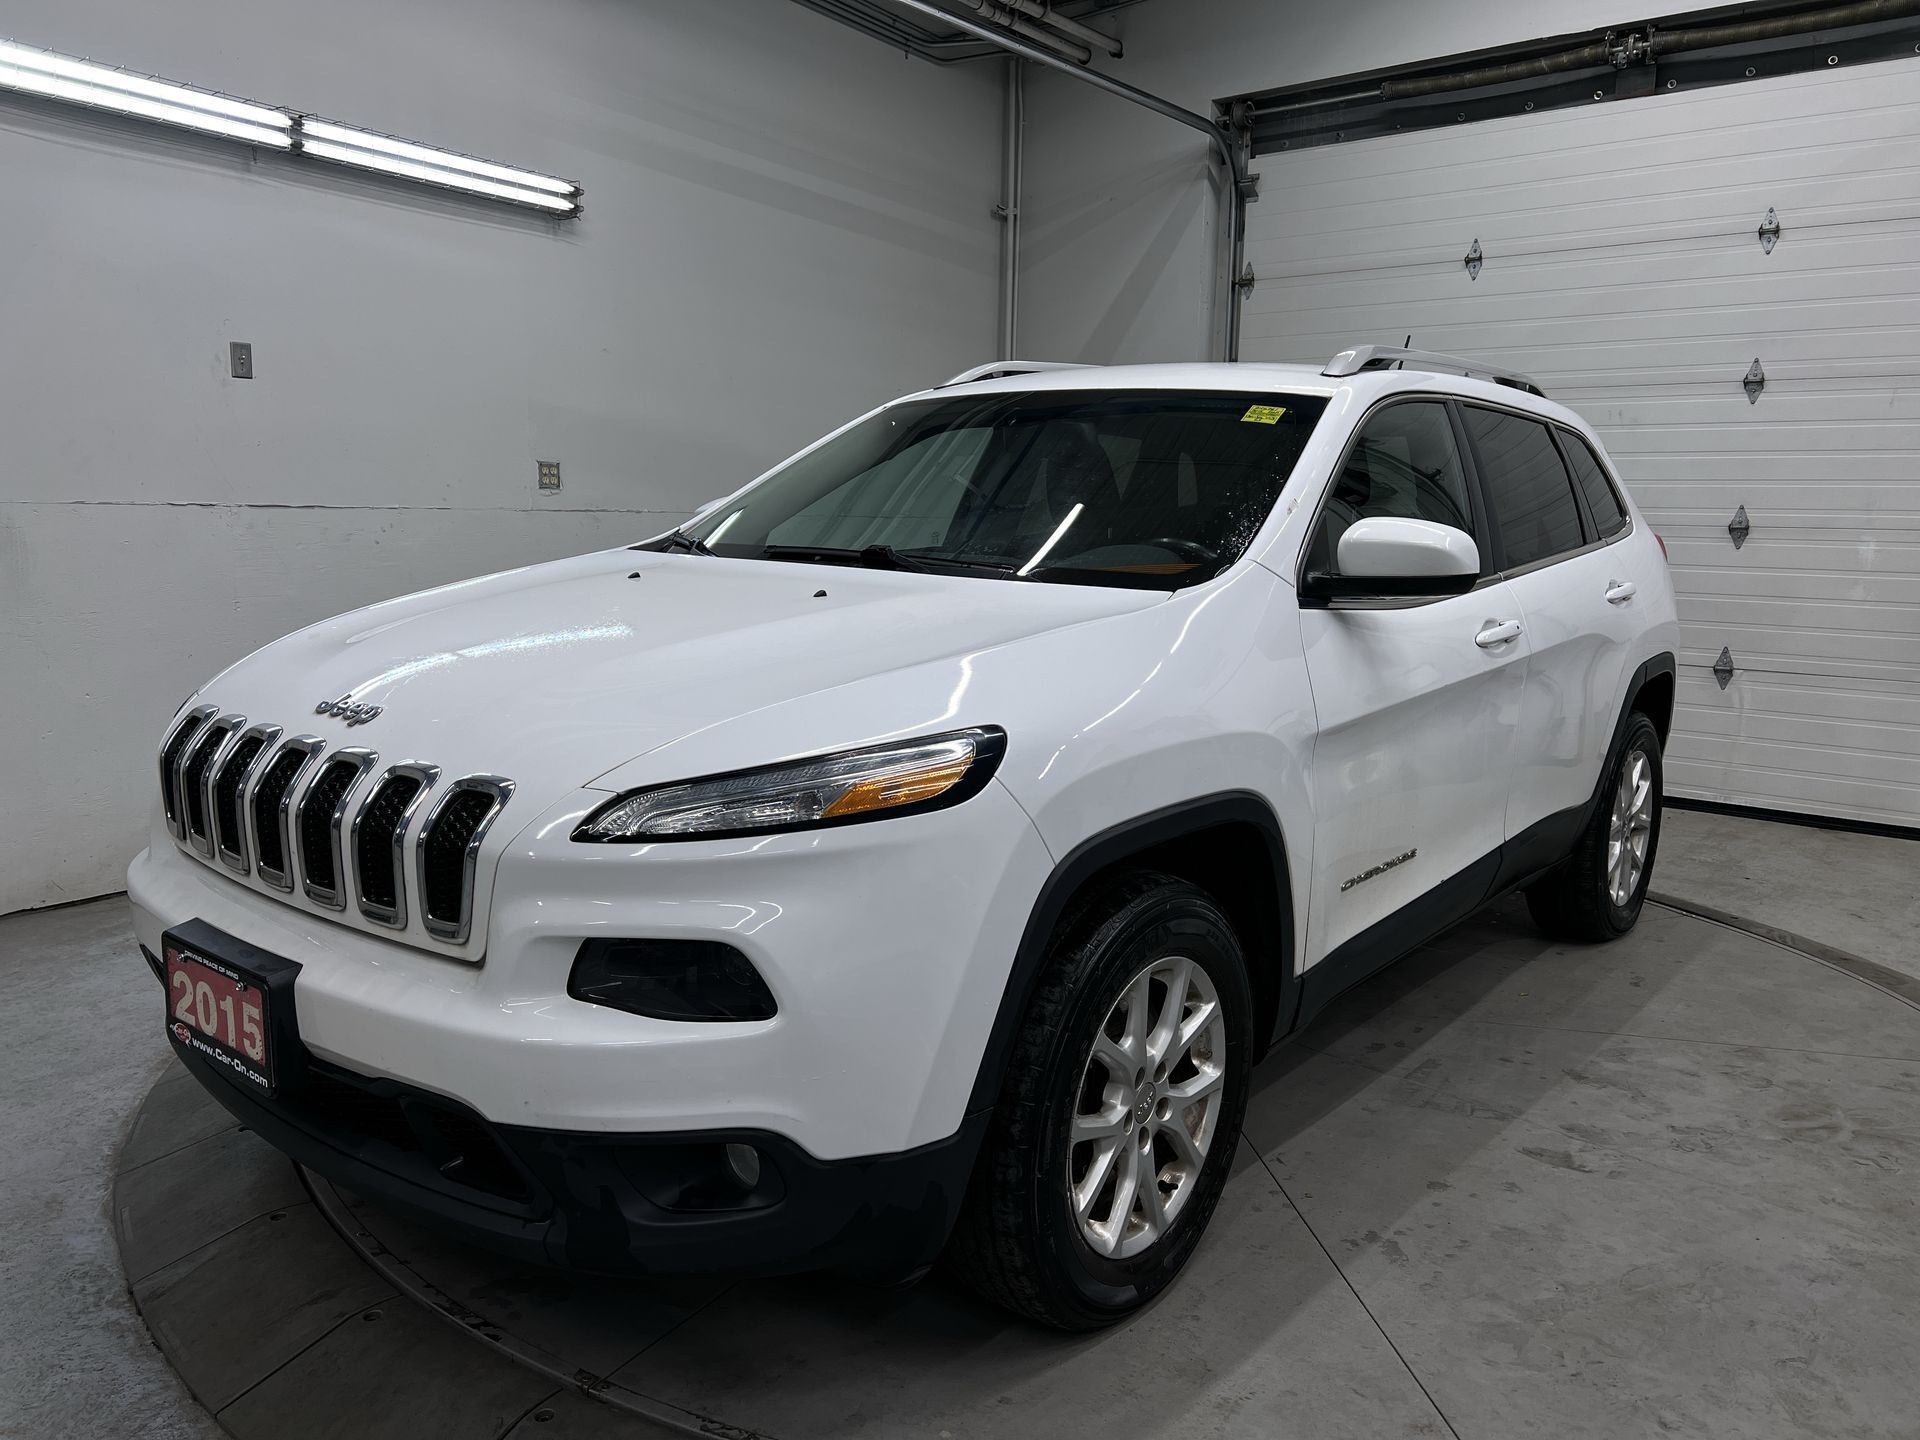 2015 Jeep Cherokee NORTH 4x4 | HTD SEATS |REMOTE START |8.4-IN SCREEN